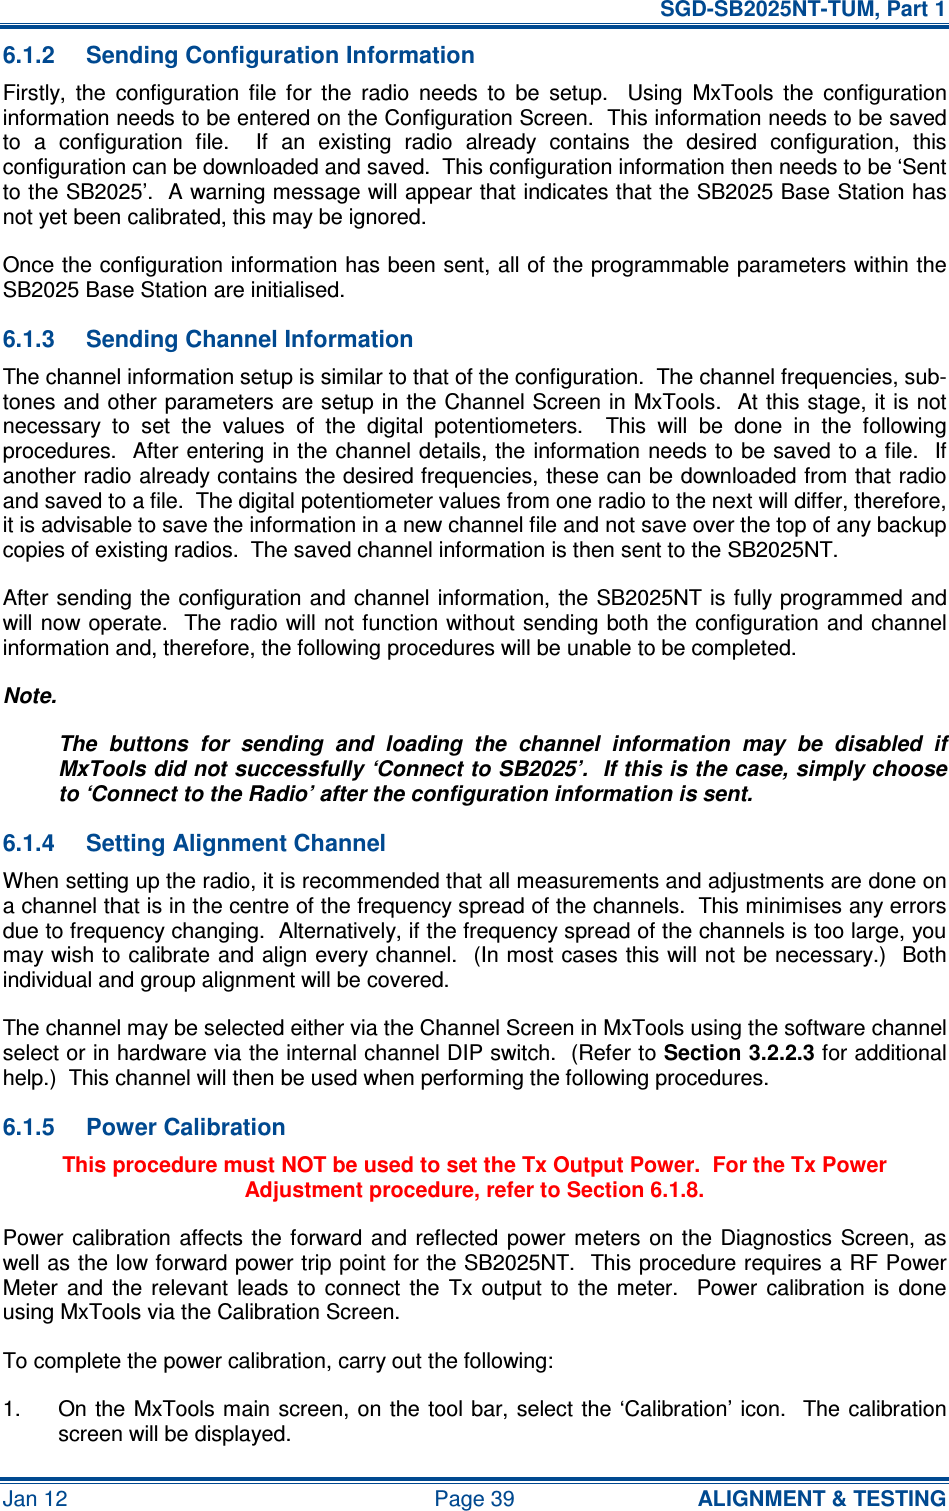   SGD-SB2025NT-TUM, Part 1 Jan 12  Page 39  ALIGNMENT &amp; TESTING 6.1.2  Sending Configuration Information Firstly,  the  configuration  file  for  the  radio  needs  to  be  setup.    Using  MxTools  the  configuration information needs to be entered on the Configuration Screen.  This information needs to be saved to  a  configuration  file.    If  an  existing  radio  already  contains  the  desired  configuration,  this configuration can be downloaded and saved.  This configuration information then needs to be ‘Sent to the SB2025’.  A warning message will appear that indicates that the SB2025 Base Station has not yet been calibrated, this may be ignored. Once the configuration information has been sent, all of the programmable parameters within the SB2025 Base Station are initialised. 6.1.3  Sending Channel Information The channel information setup is similar to that of the configuration.  The channel frequencies, sub-tones and other parameters are setup in the Channel Screen in MxTools.  At this stage, it is not necessary  to  set  the  values  of  the  digital  potentiometers.    This  will  be  done  in  the  following procedures.  After entering in the channel details, the information needs to  be saved to a file.  If another radio already contains the desired frequencies, these can be downloaded from that radio and saved to a file.  The digital potentiometer values from one radio to the next will differ, therefore, it is advisable to save the information in a new channel file and not save over the top of any backup copies of existing radios.  The saved channel information is then sent to the SB2025NT. After sending  the configuration and channel information, the SB2025NT is fully programmed  and will now operate.  The radio will not function without sending both the configuration and channel information and, therefore, the following procedures will be unable to be completed. Note. The  buttons  for  sending  and  loading  the  channel  information  may  be  disabled  if MxTools did not successfully ‘Connect to SB2025’.  If this is the case, simply choose to ‘Connect to the Radio’ after the configuration information is sent. 6.1.4  Setting Alignment Channel When setting up the radio, it is recommended that all measurements and adjustments are done on a channel that is in the centre of the frequency spread of the channels.  This minimises any errors due to frequency changing.  Alternatively, if the frequency spread of the channels is too large, you may wish to calibrate and align every channel.  (In most cases this will not be necessary.)  Both individual and group alignment will be covered. The channel may be selected either via the Channel Screen in MxTools using the software channel select or in hardware via the internal channel DIP switch.  (Refer to Section 3.2.2.3 for additional help.)  This channel will then be used when performing the following procedures. 6.1.5  Power Calibration This procedure must NOT be used to set the Tx Output Power.  For the Tx Power Adjustment procedure, refer to Section 6.1.8. Power calibration  affects  the  forward and  reflected power meters  on  the Diagnostics  Screen,  as well as the low forward power trip point for the SB2025NT.  This procedure requires a RF Power Meter  and  the  relevant  leads  to  connect  the  Tx  output  to  the  meter.    Power  calibration  is  done using MxTools via the Calibration Screen. To complete the power calibration, carry out the following: 1.  On the  MxTools main  screen, on the tool bar, select the ‘Calibration’ icon.    The  calibration screen will be displayed. 